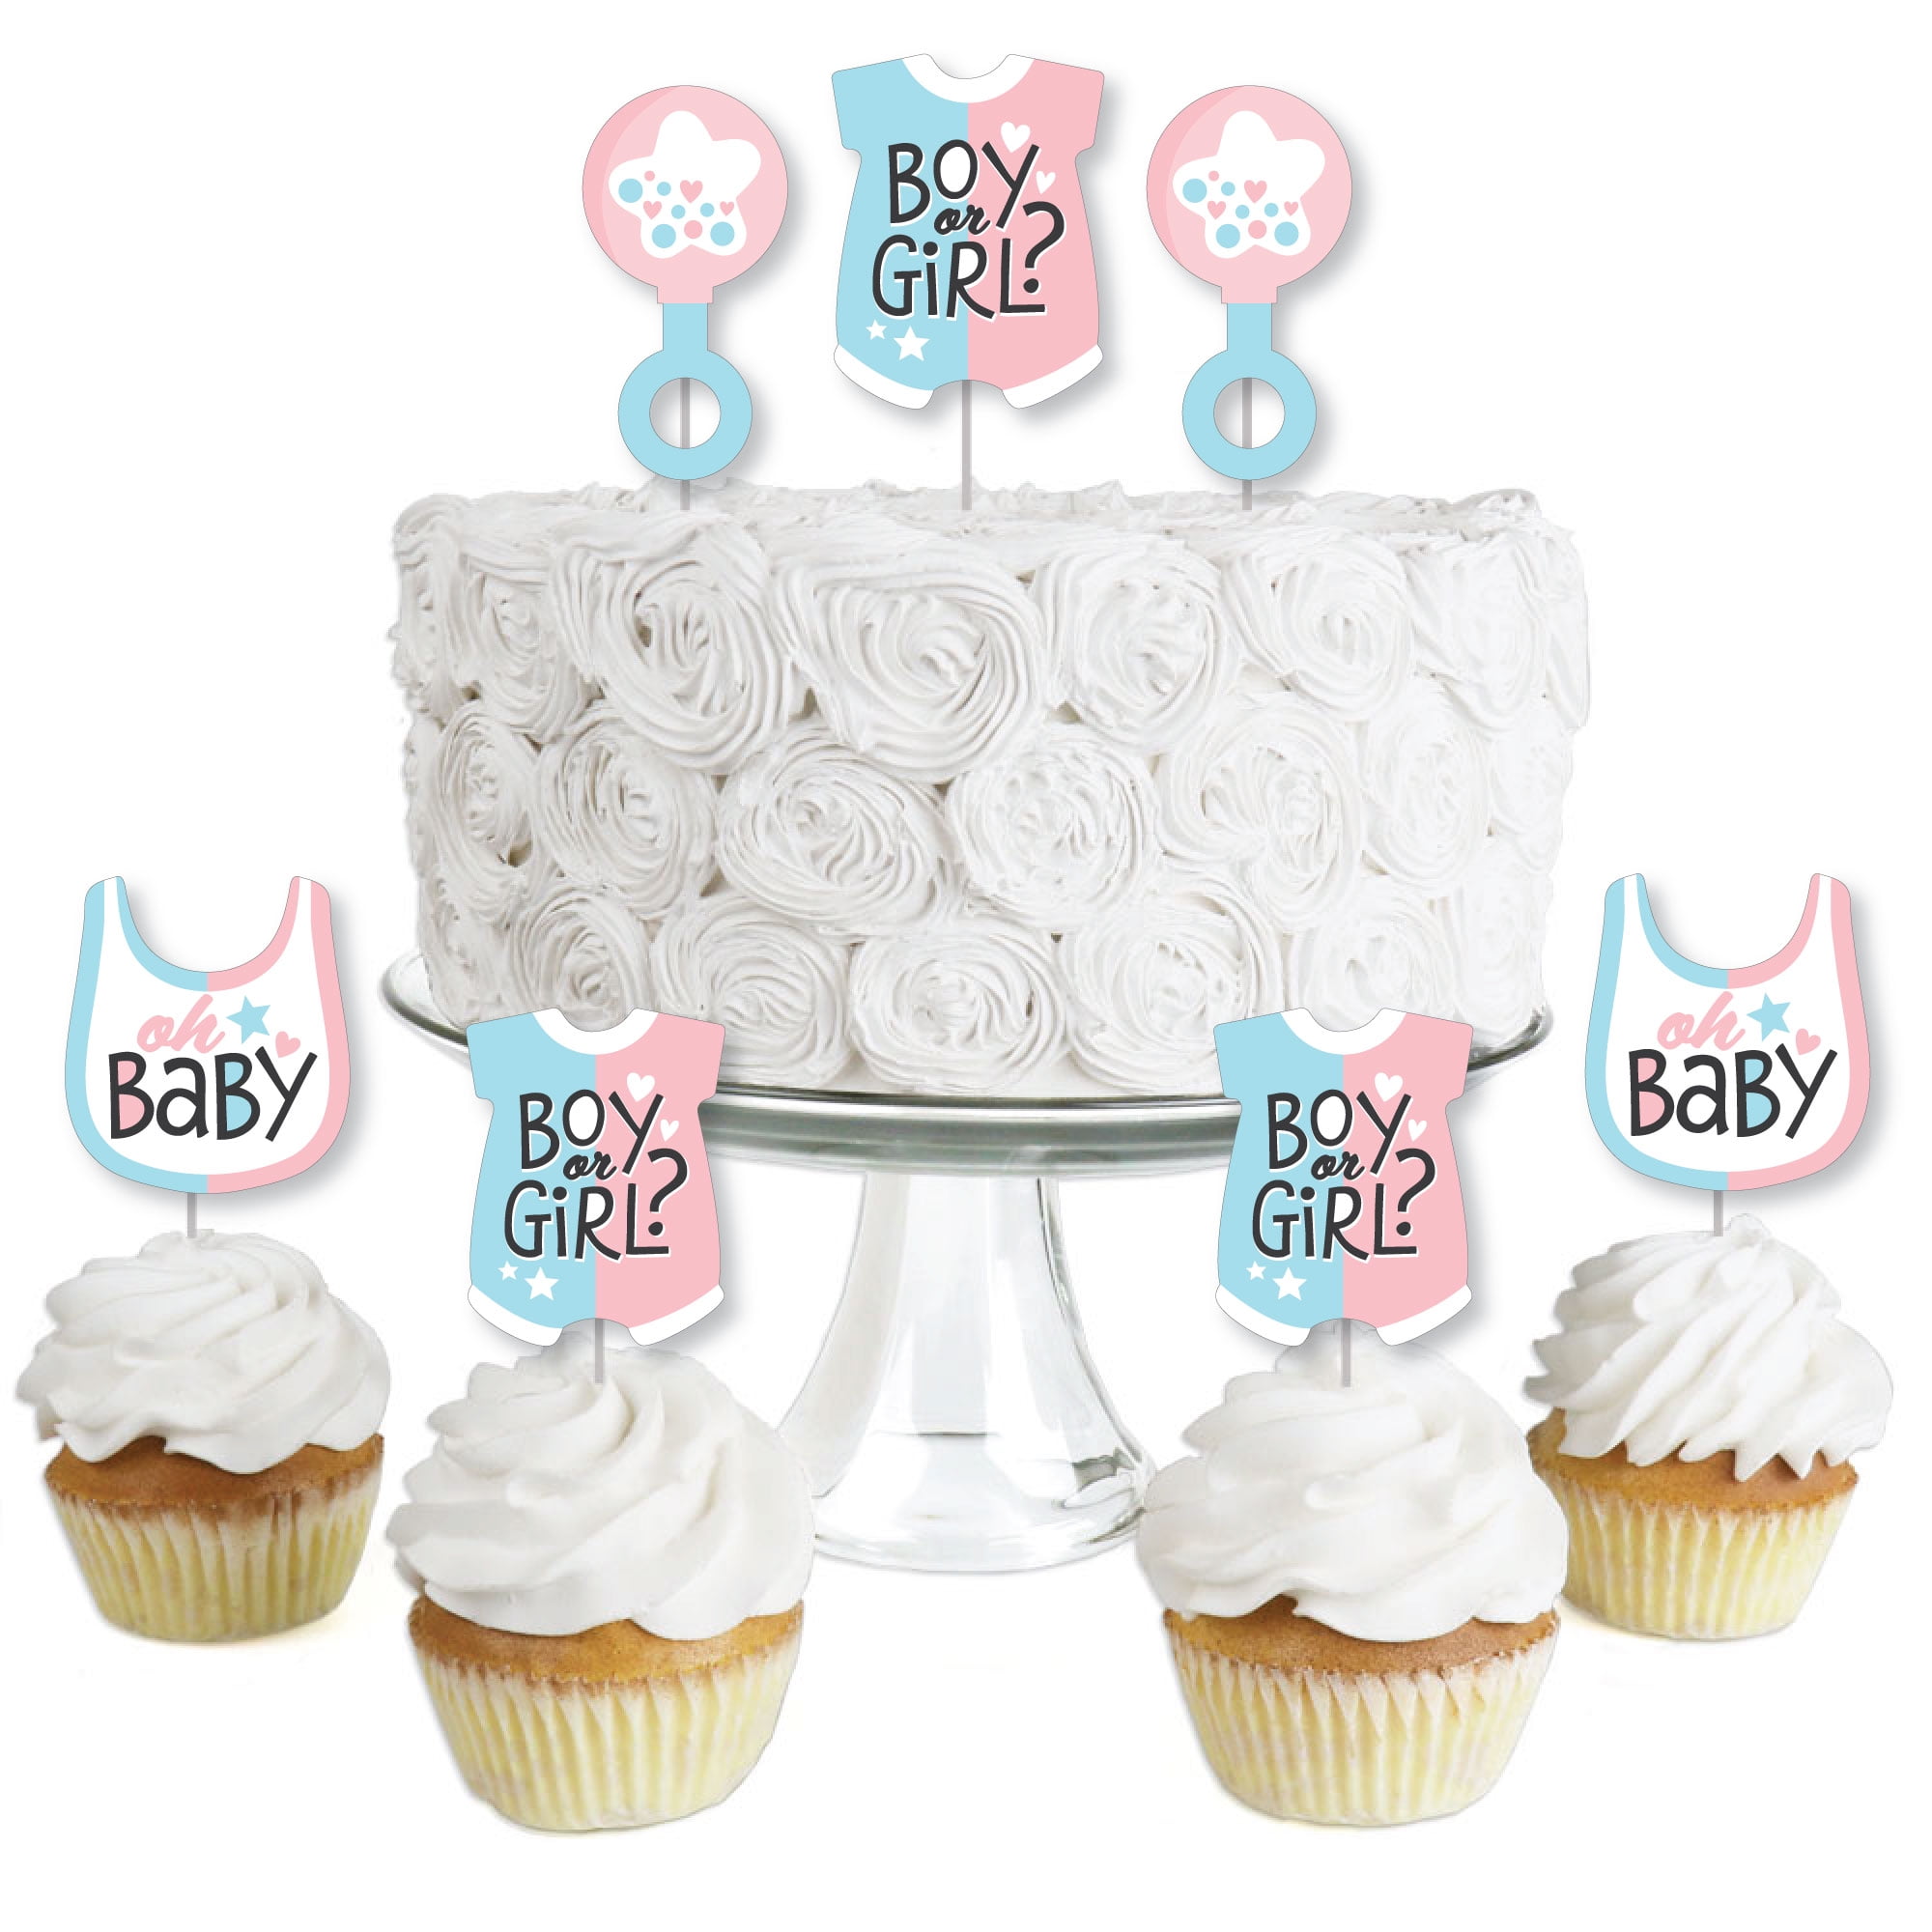 Lures or Lace Gender Reveal Cupcake Toppers 